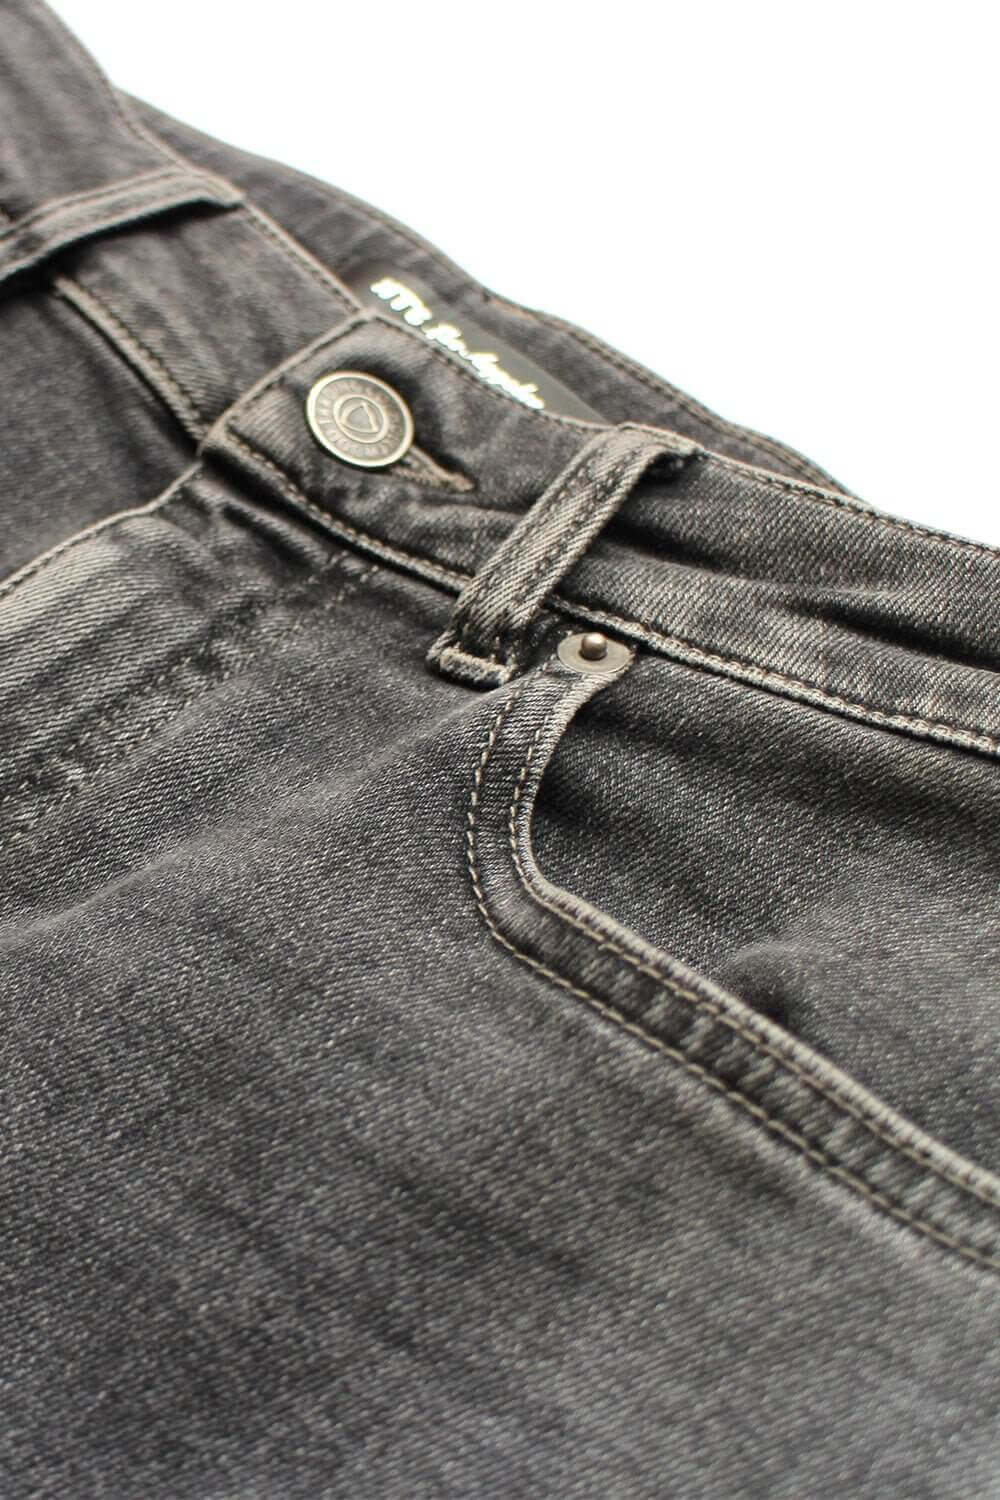 BOOTCUT WOMAN Bootcut fit jeans, 5 pockets, hidden front zip closure. 100% cotton. Made in Italy. GREY HTC LOS ANGELES